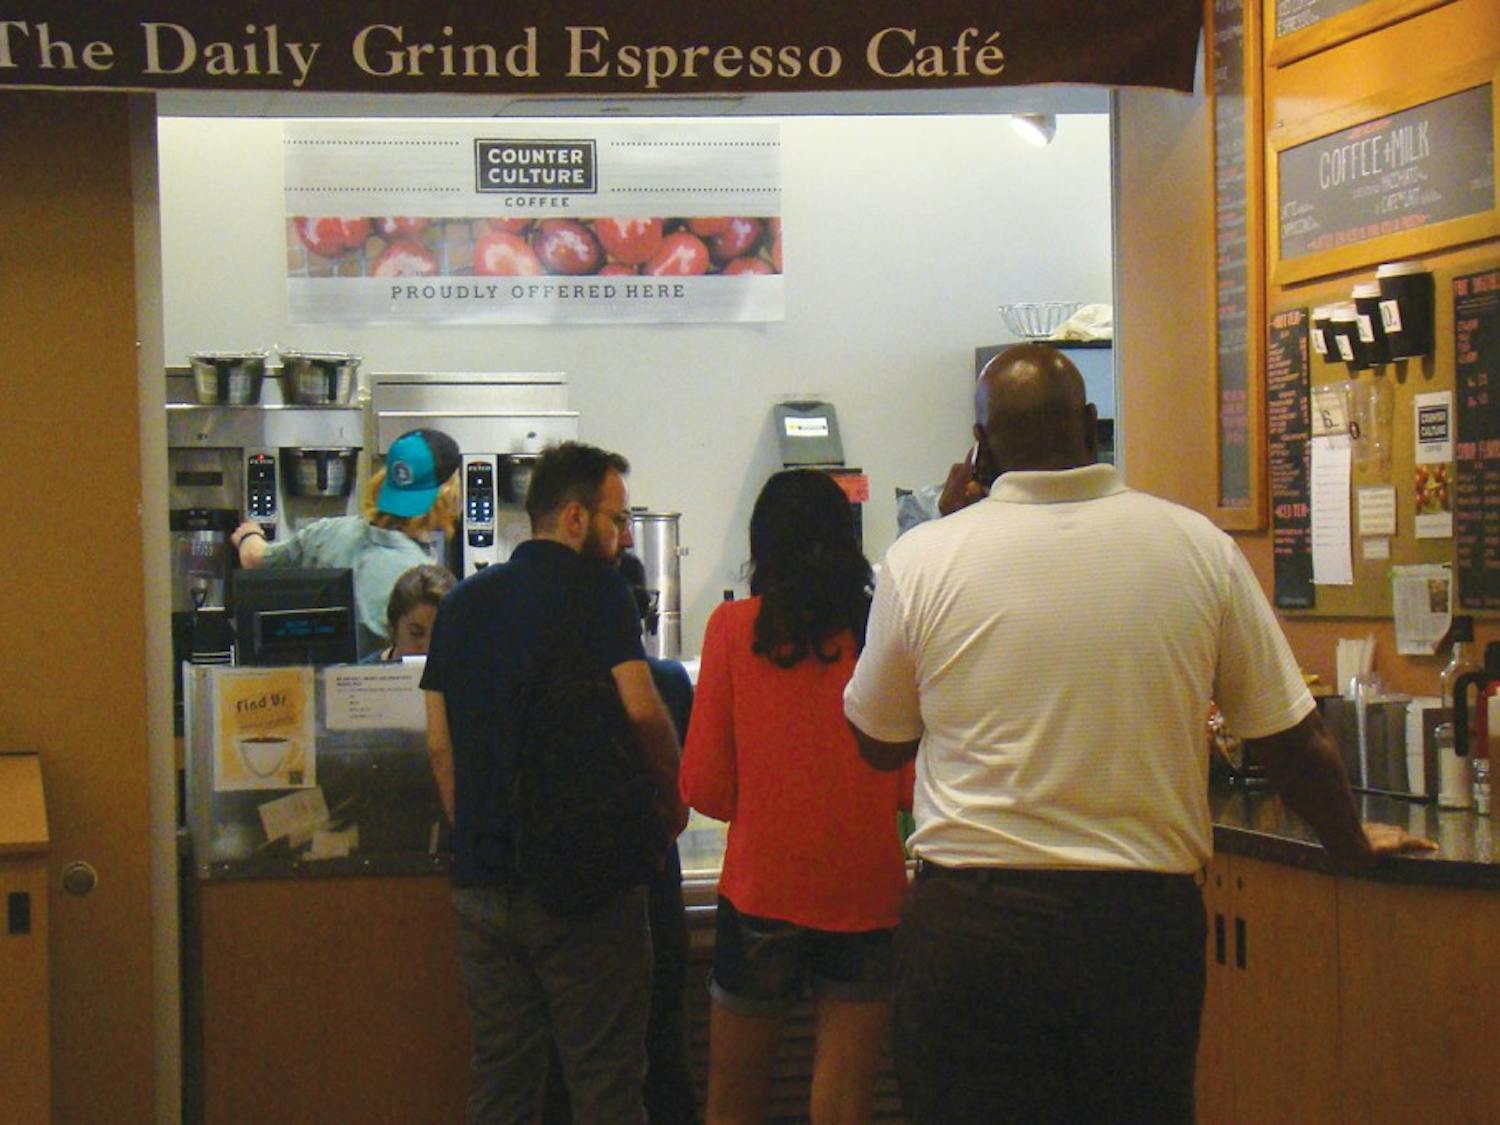 Senior Biology major, Emily Price, serves customers of The Daily Grind Espresso Cafe. The Daily Grind will likely be closed and replaced with the ownership of the UNC Student Stores transitioning to Barnes & Noble on July 1.